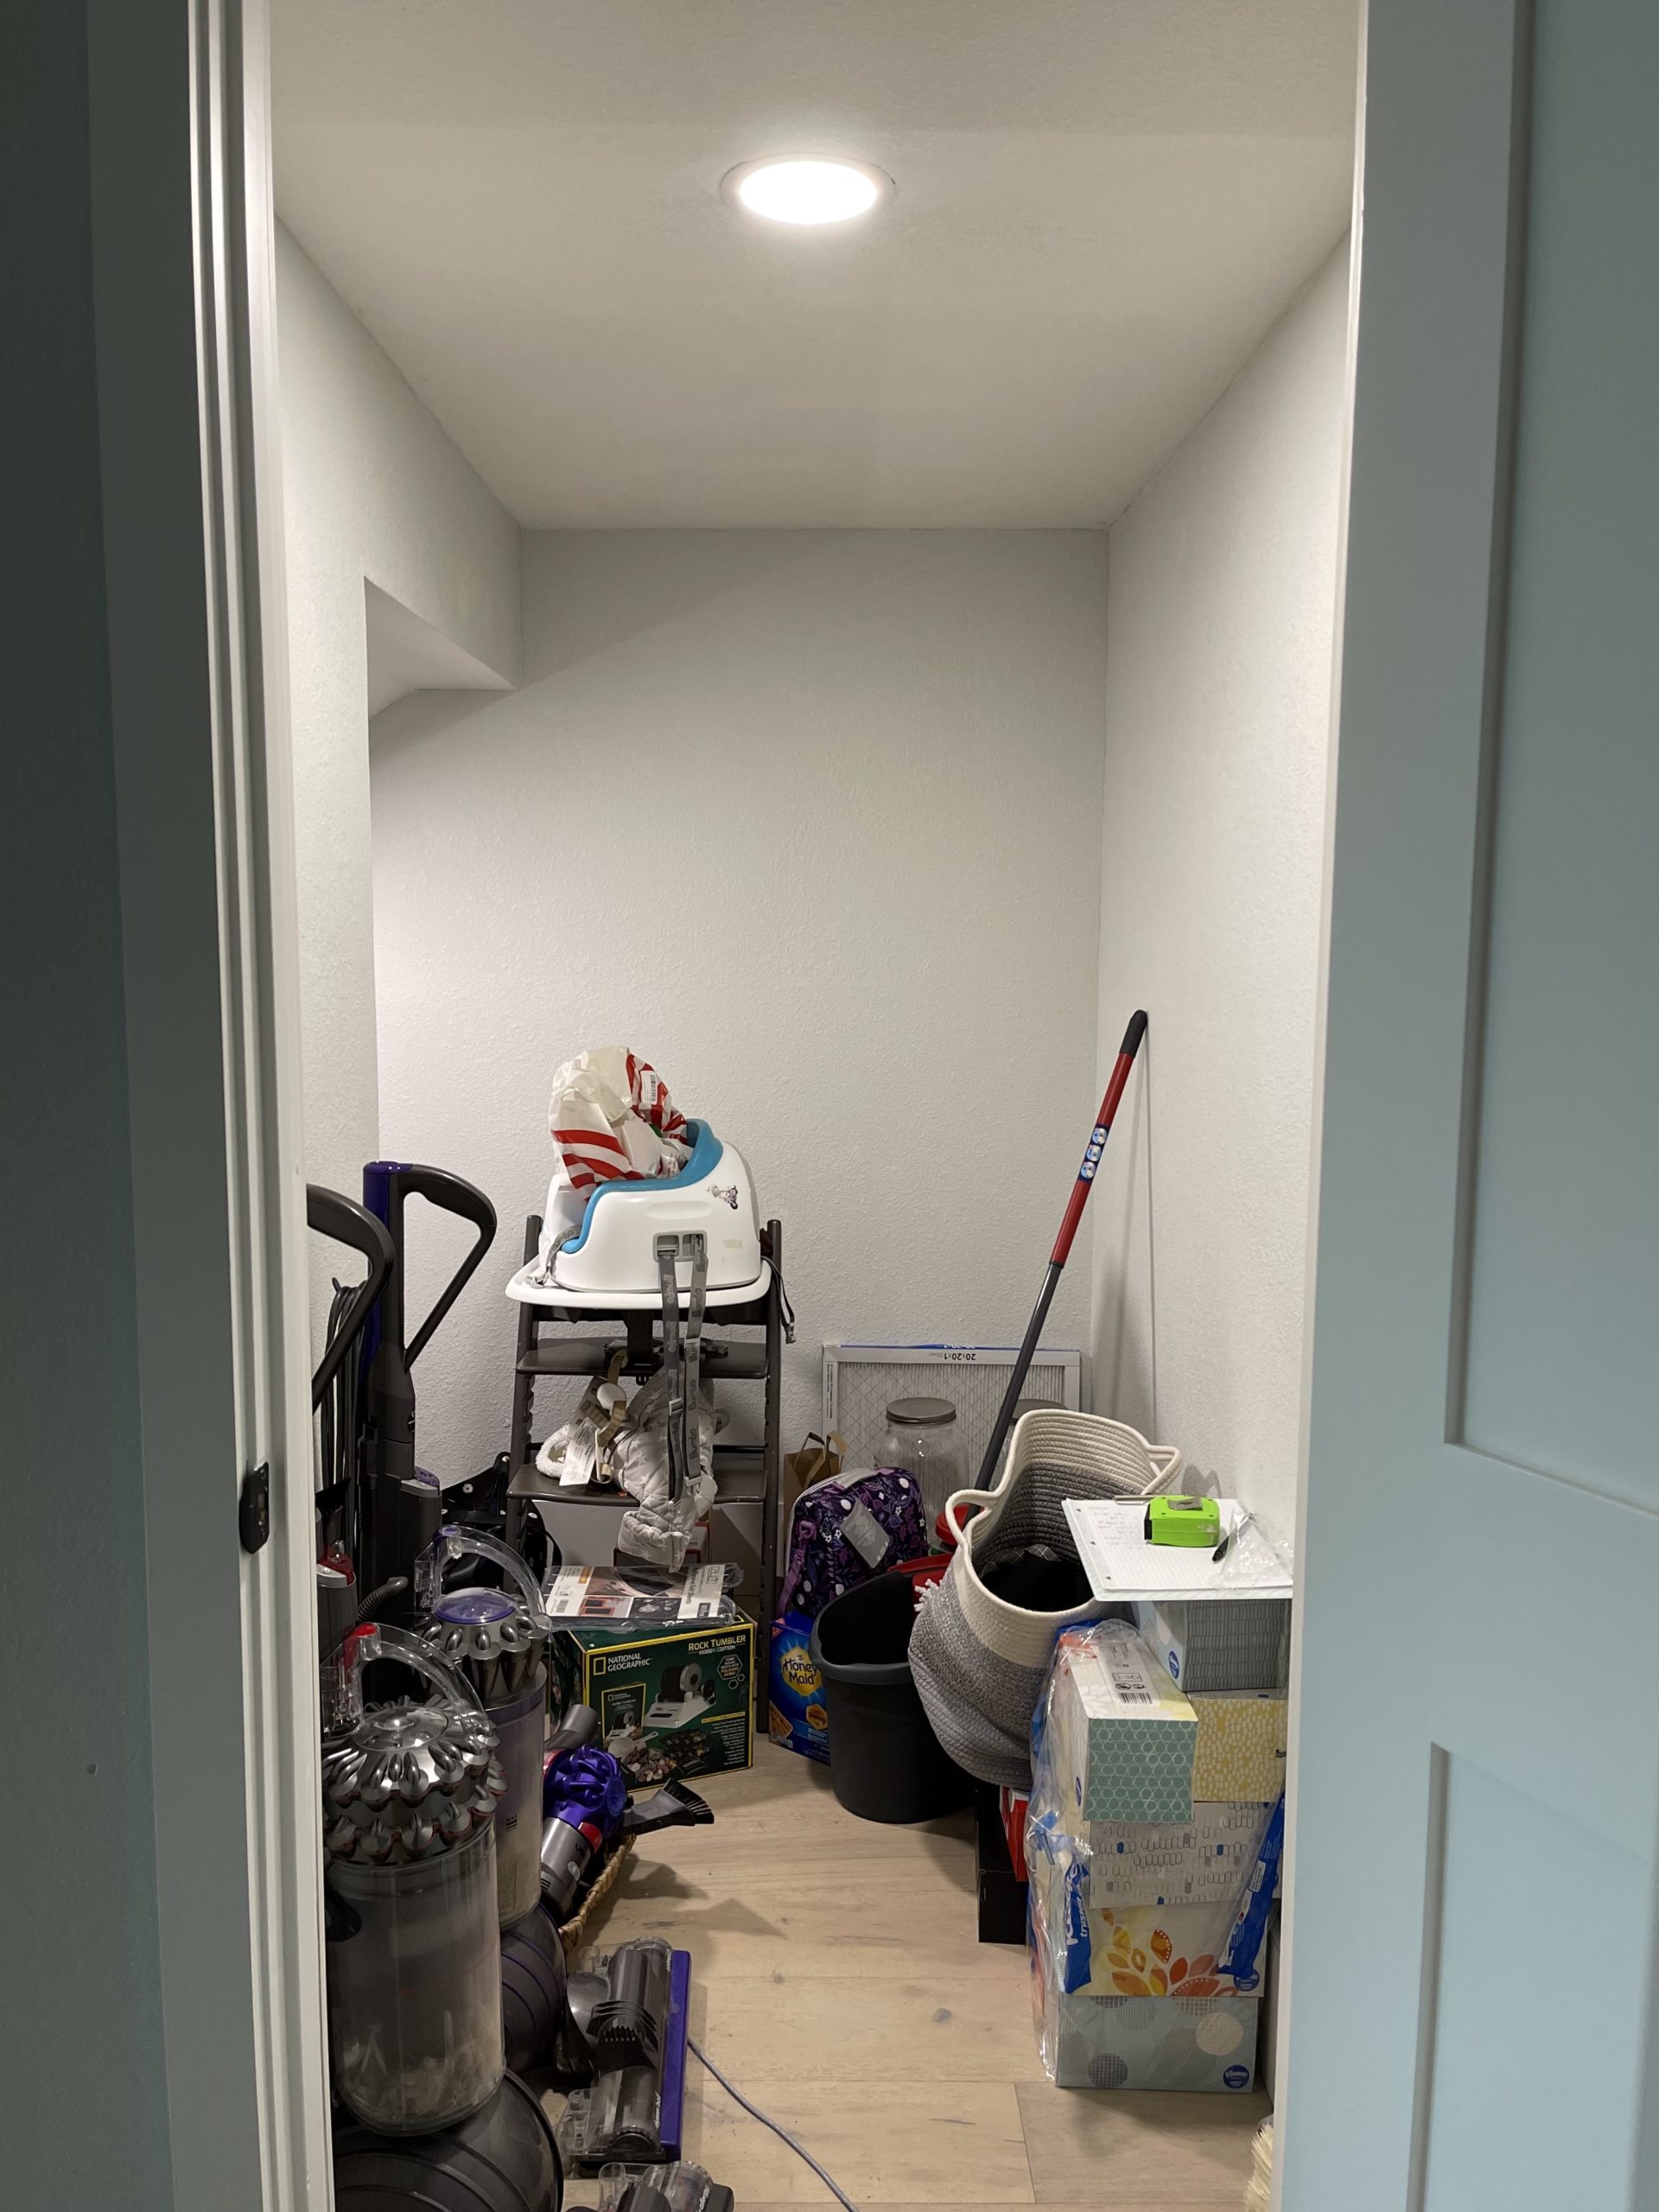 https://simplyorganized.me/wp-content/uploads/2022/08/simply-organized-under-stairs-closet-danville-california-before-with-contents-scaled.jpg